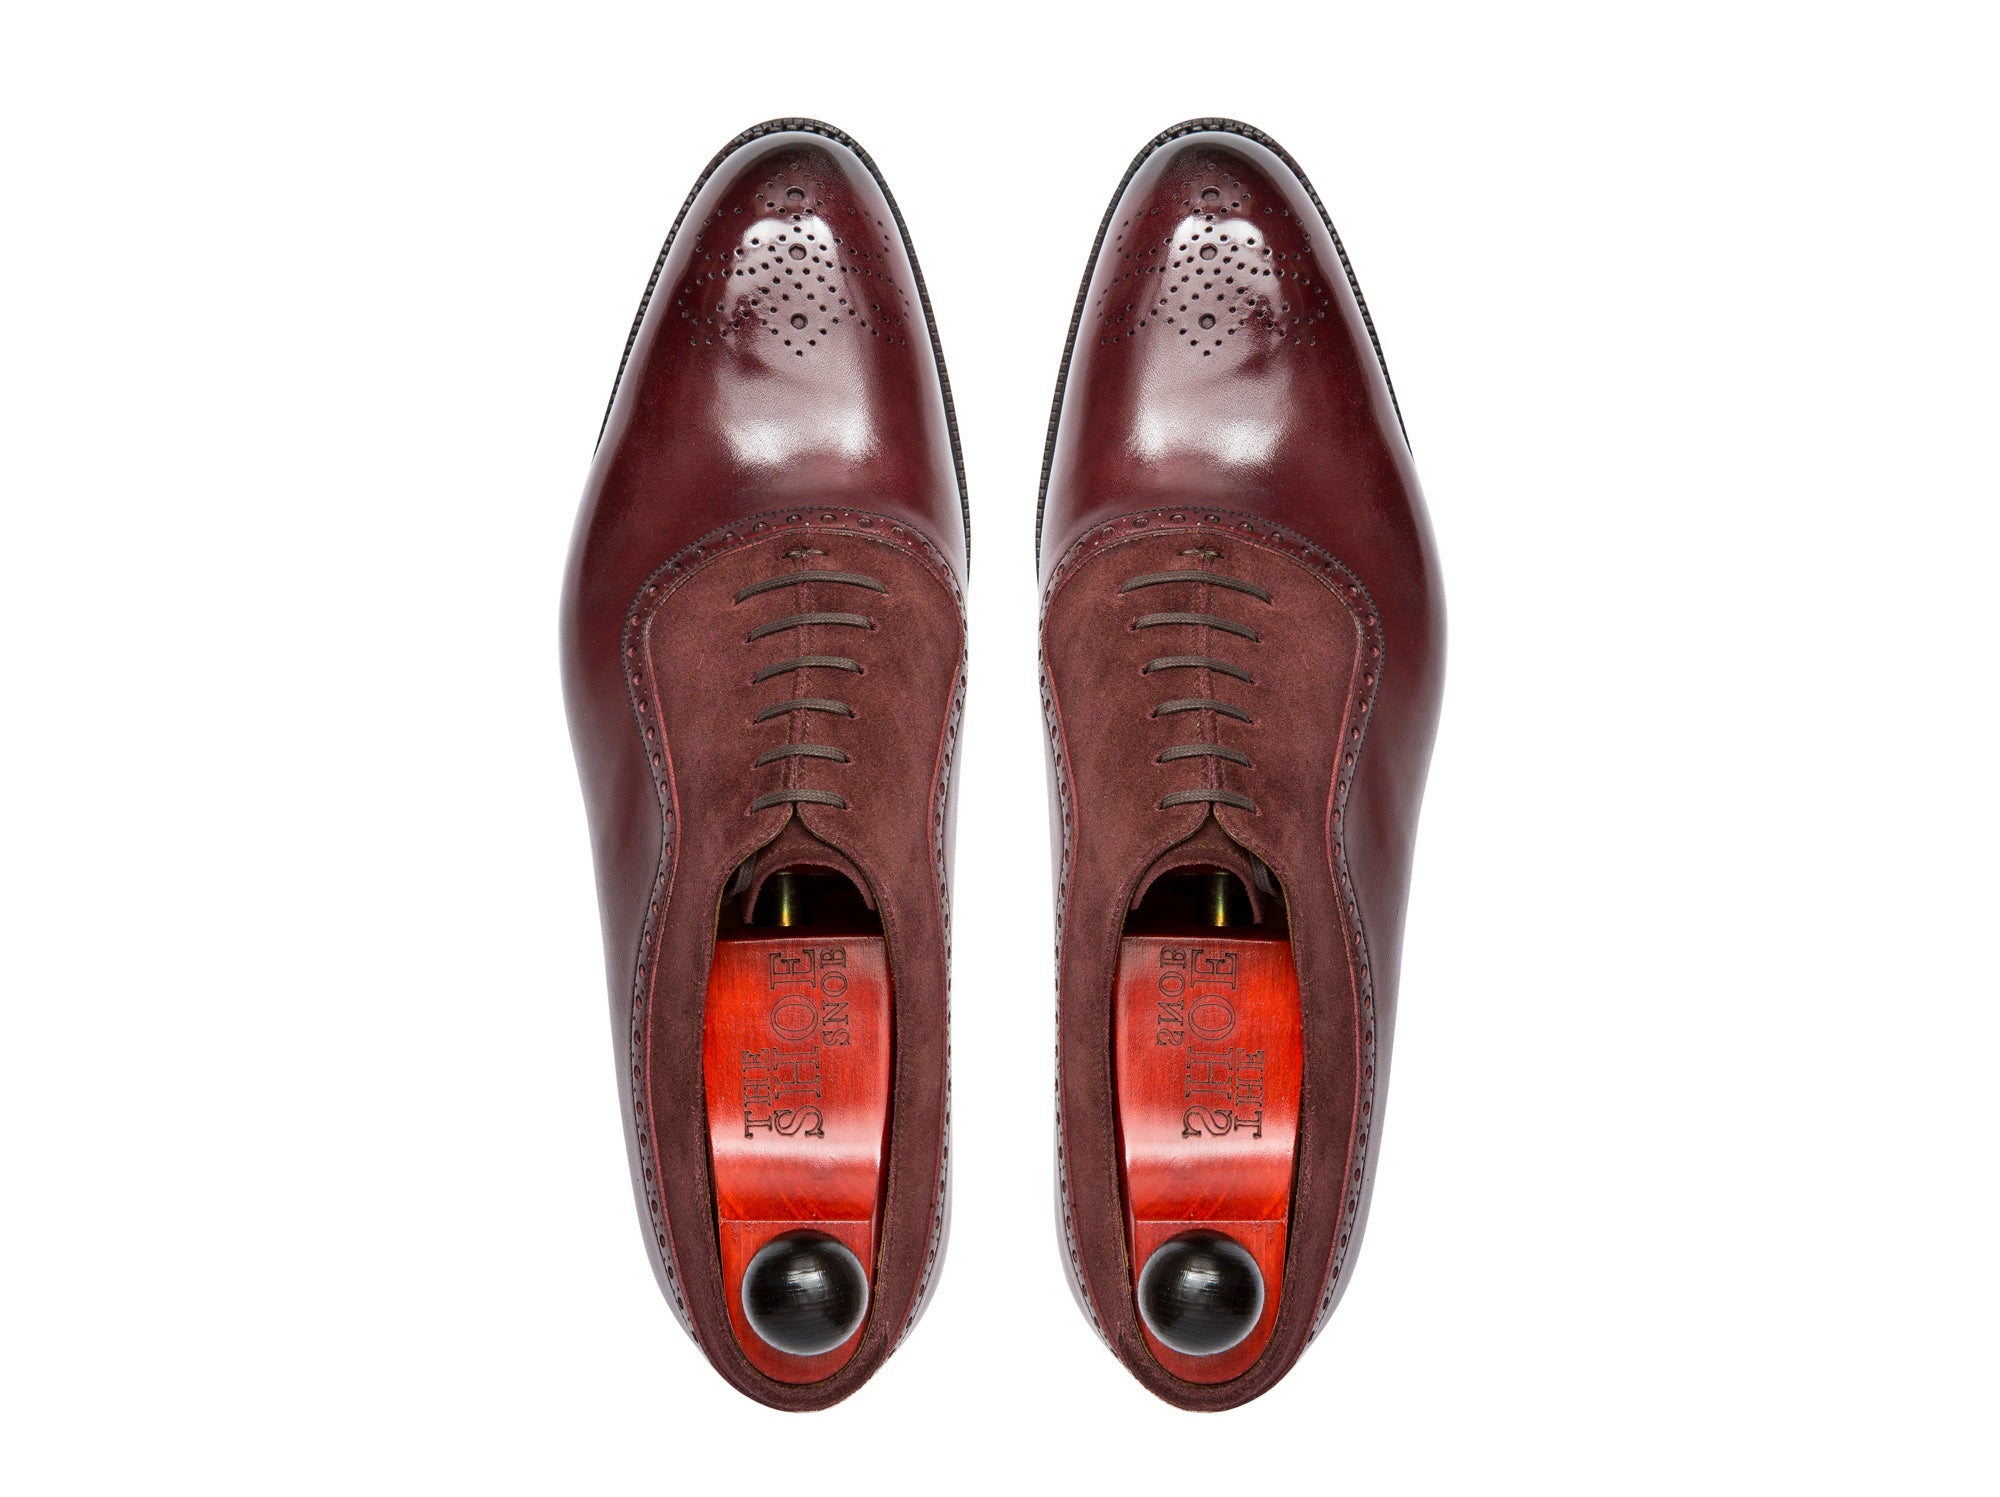 Roosevelt - MTO - Burgundy Calf / Burgundy Suede - NGT Last - Single Leather Sole